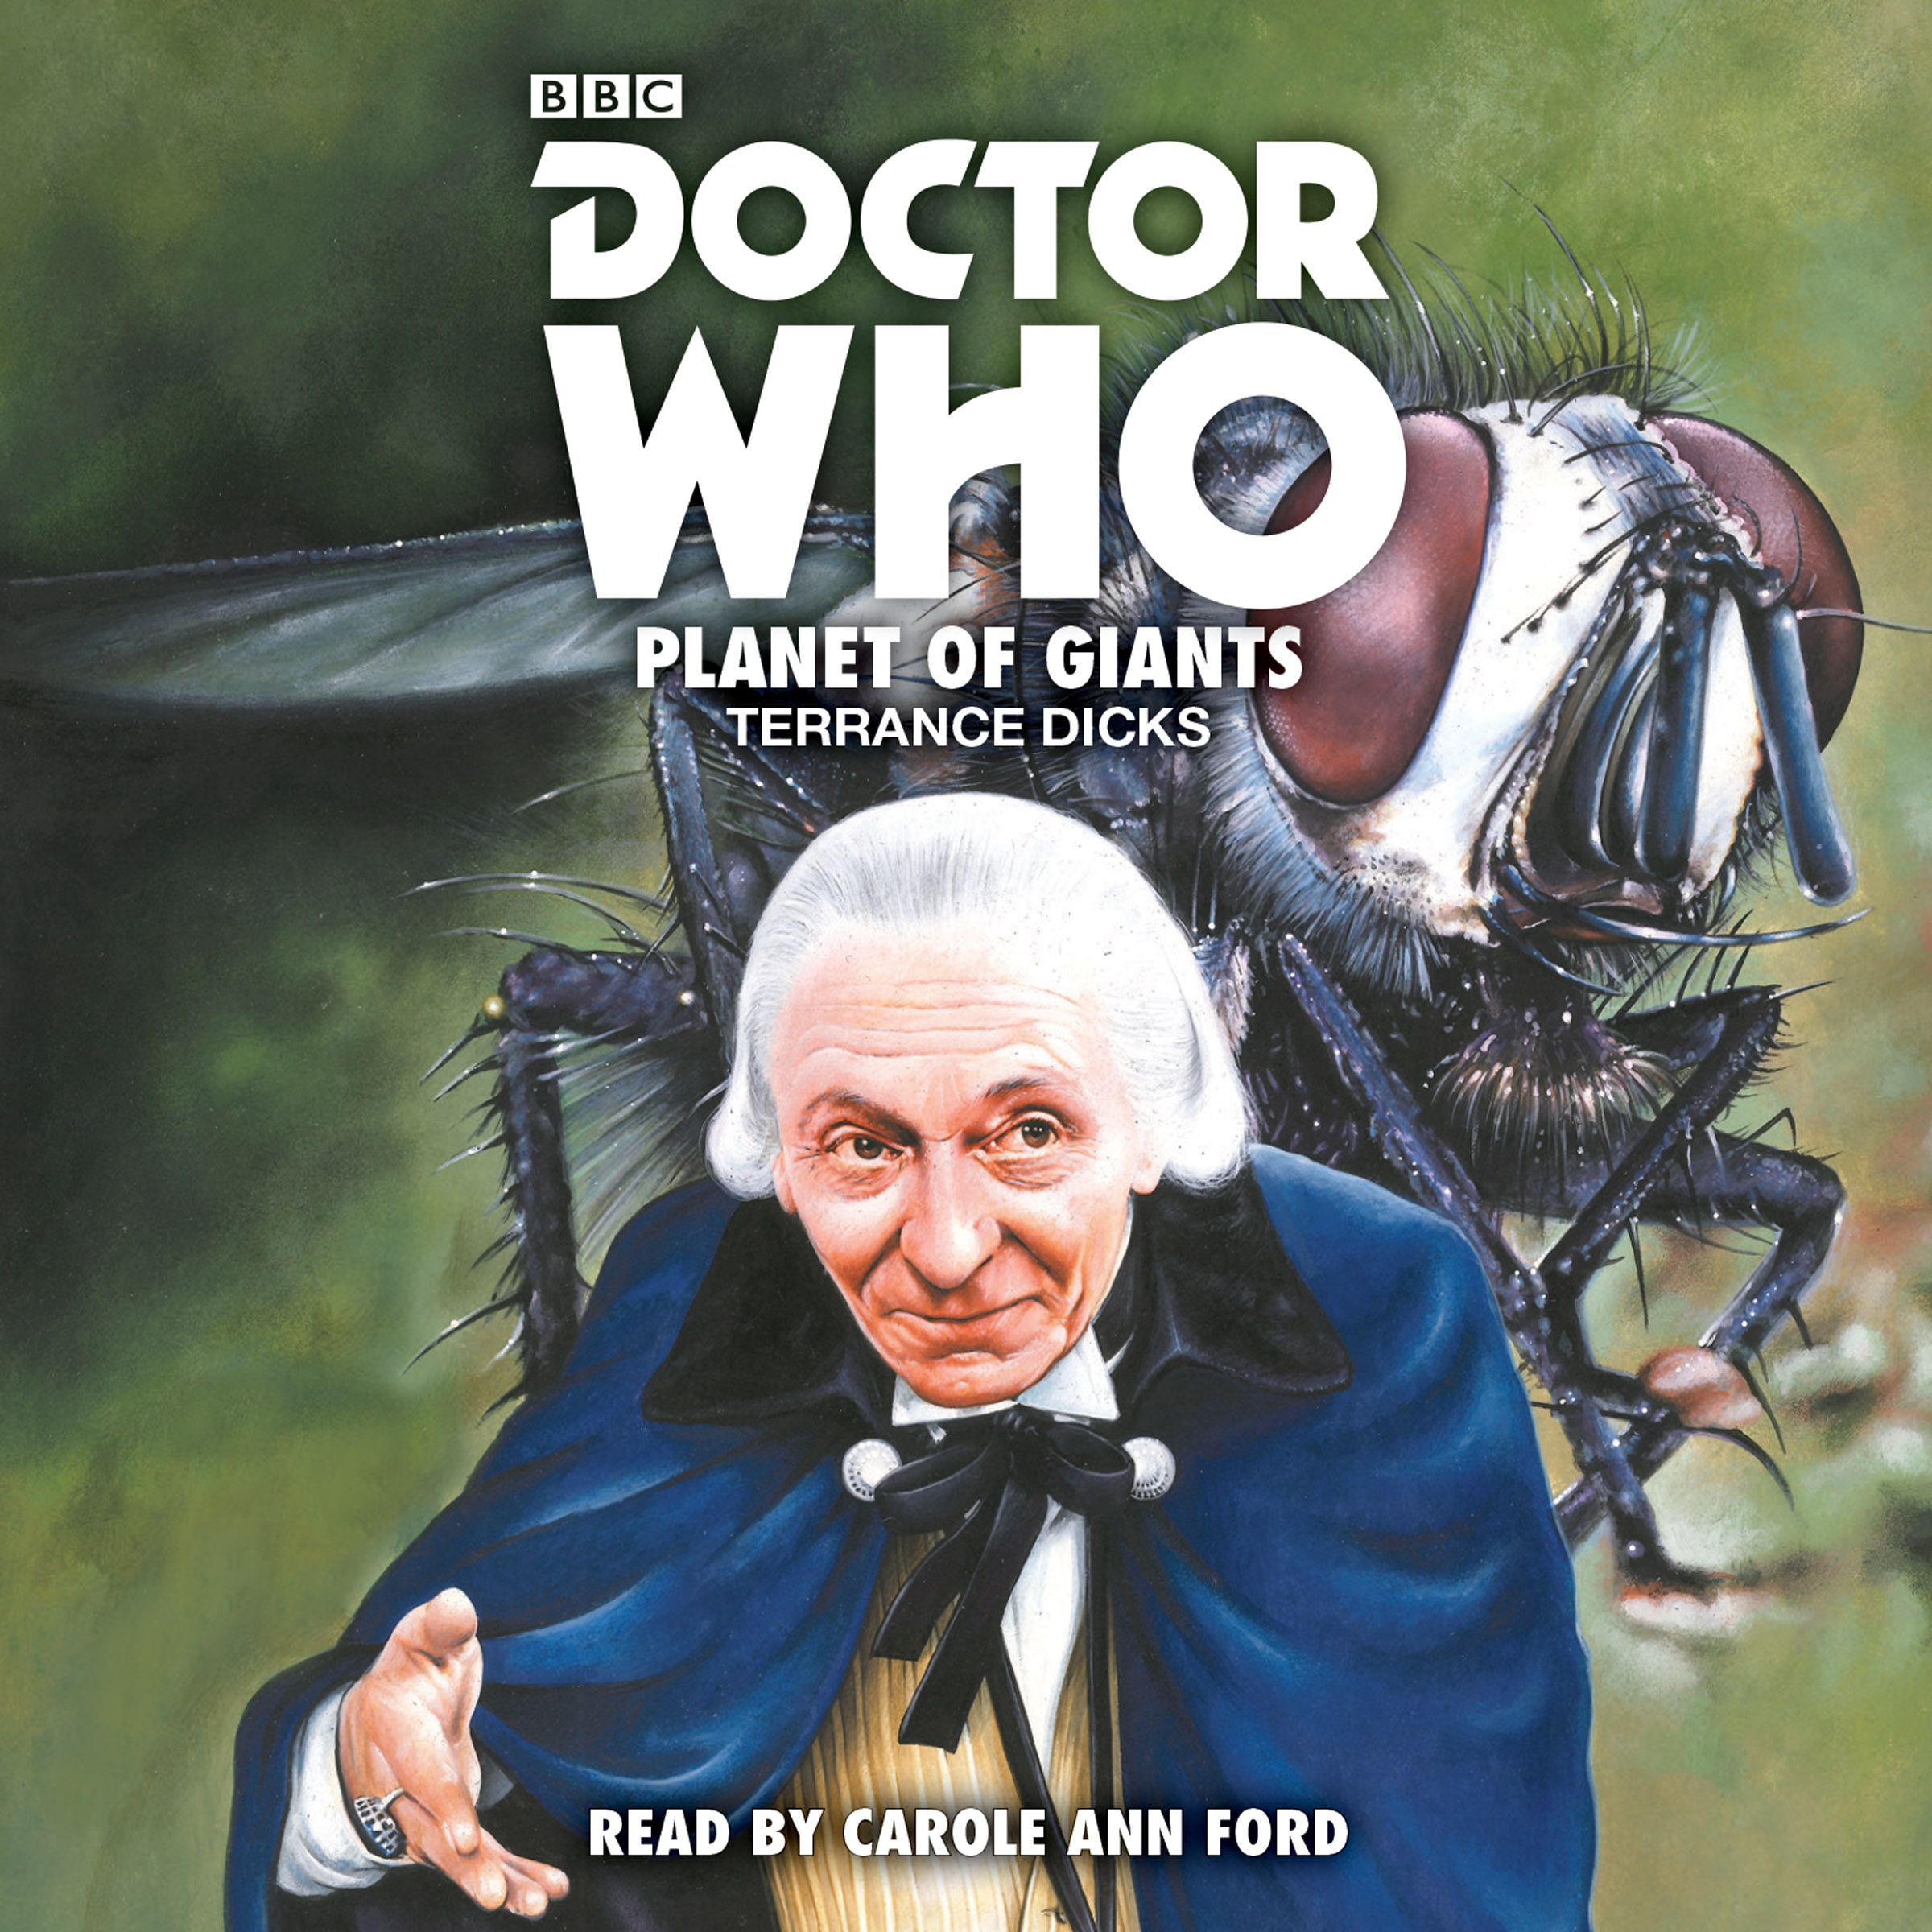 Doctor Who 'Planet of Giants' cover art